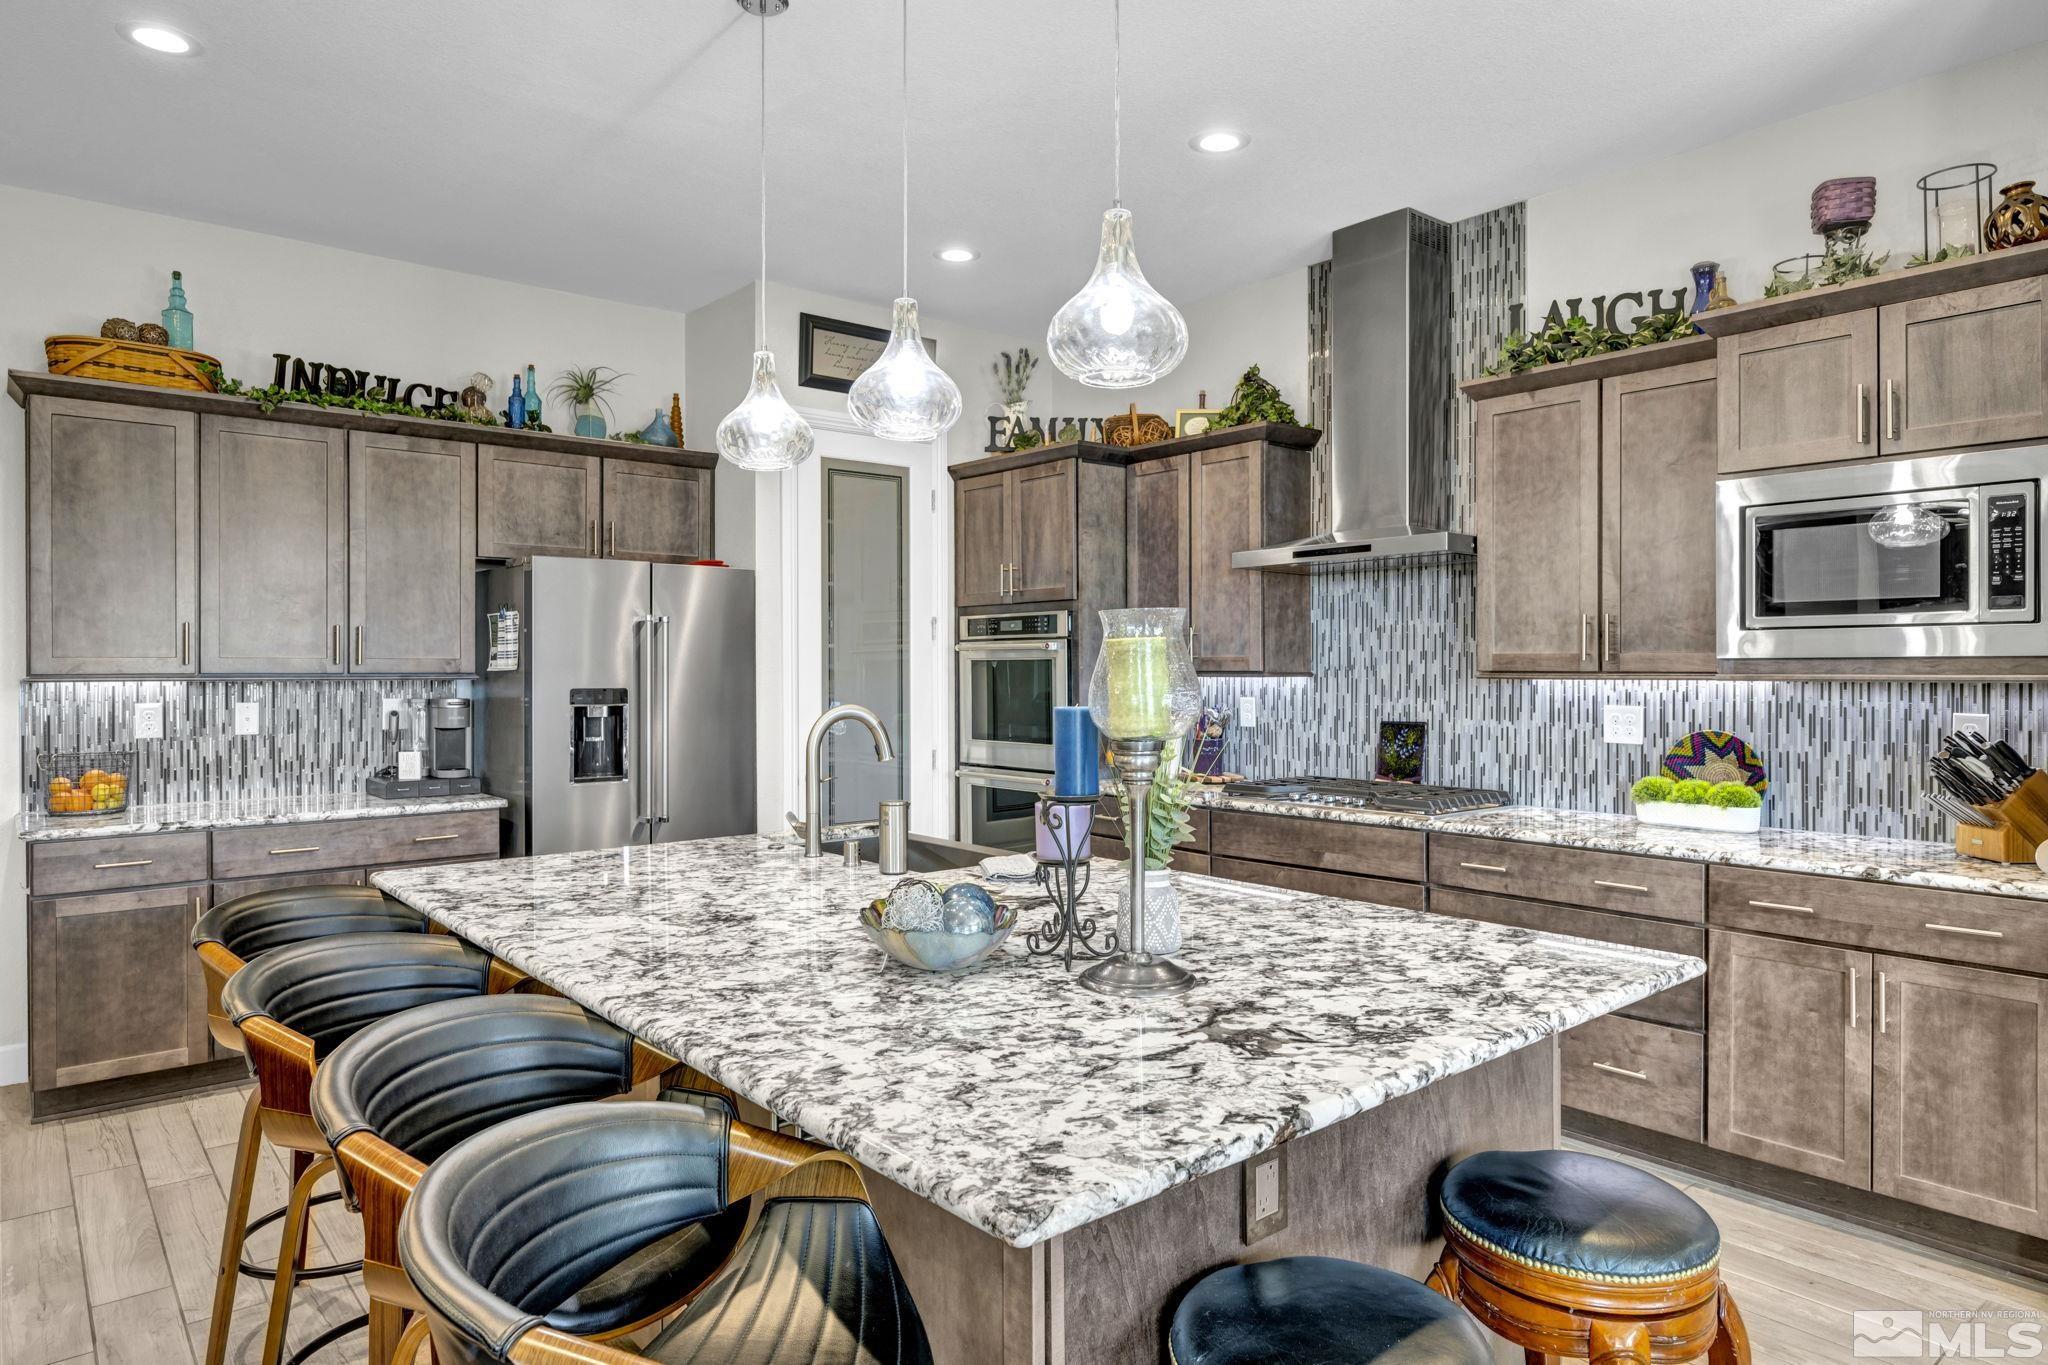 a kitchen with stainless steel appliances kitchen island granite countertop a table chairs and a wooden cabinets